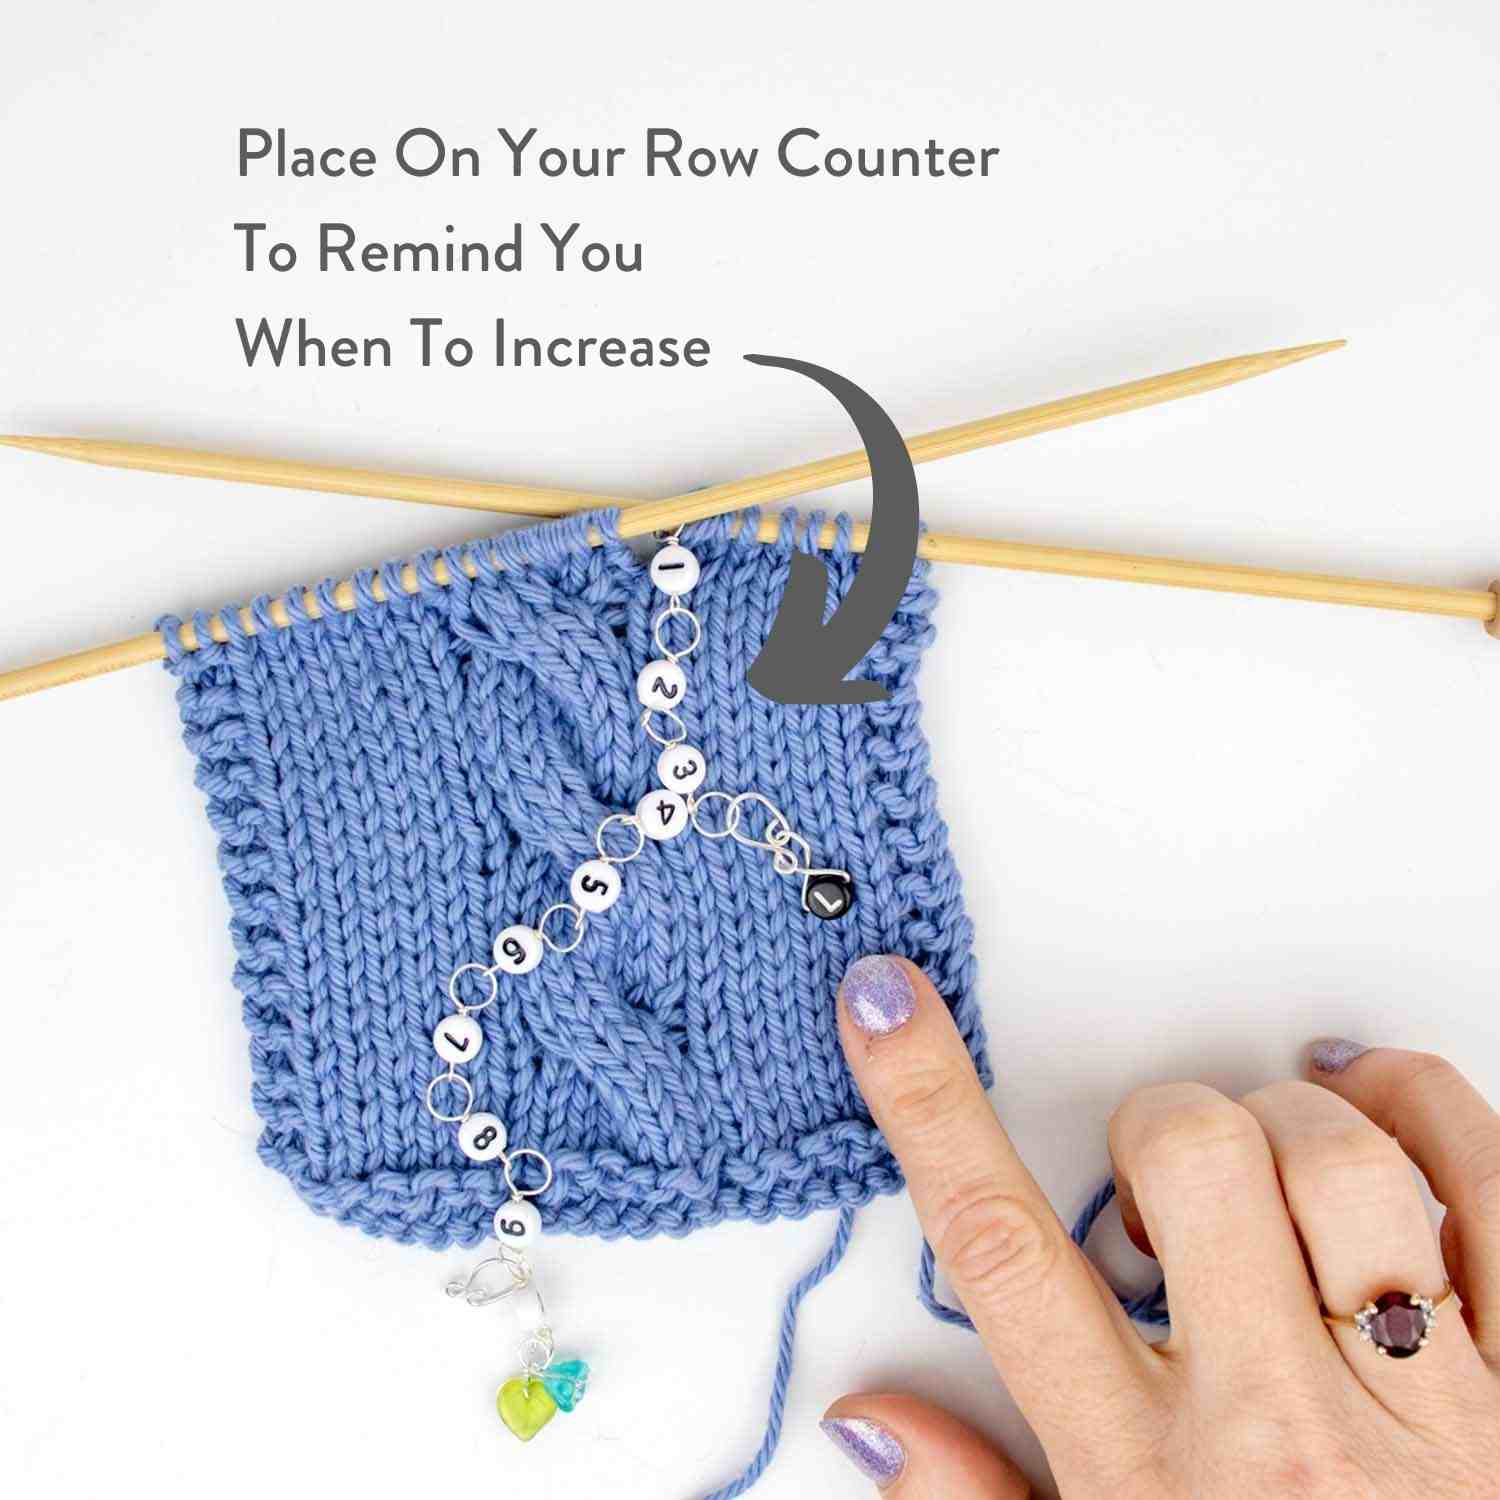 I got this row-counter in my beginner crochet kit. It does not